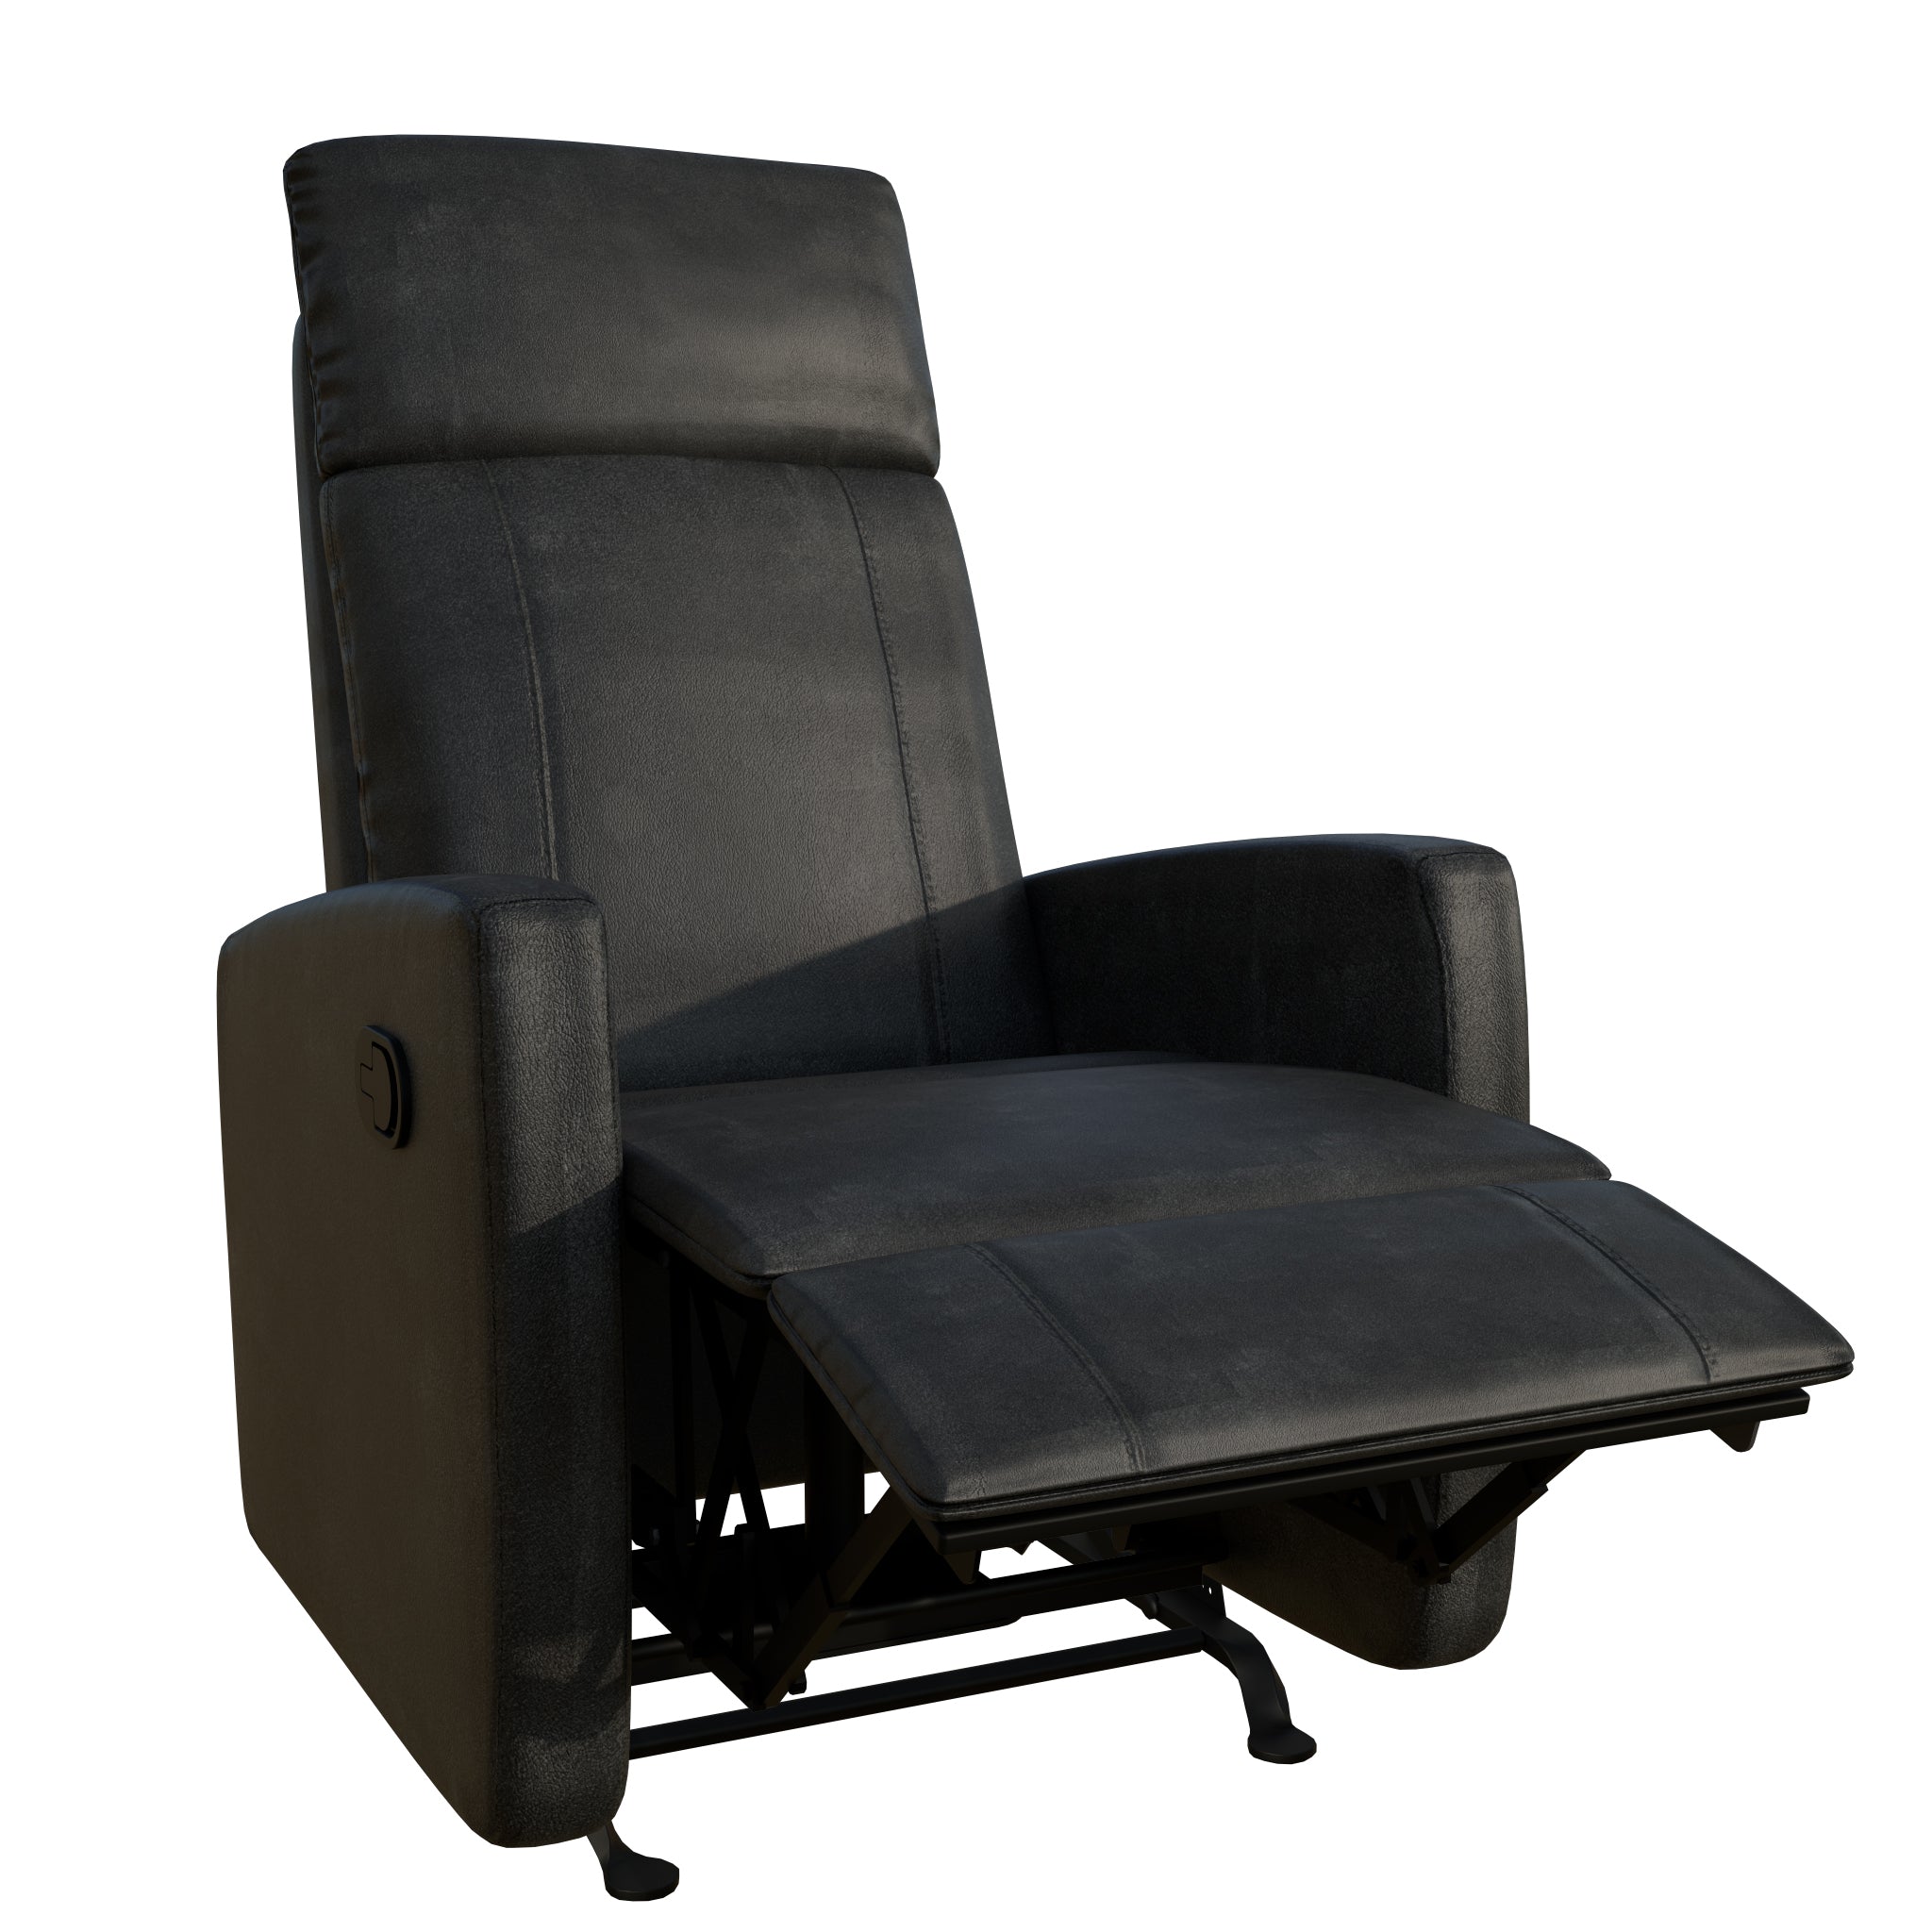 Melo Relax+ Glider - ANB Baby -766429782292$300 - $500